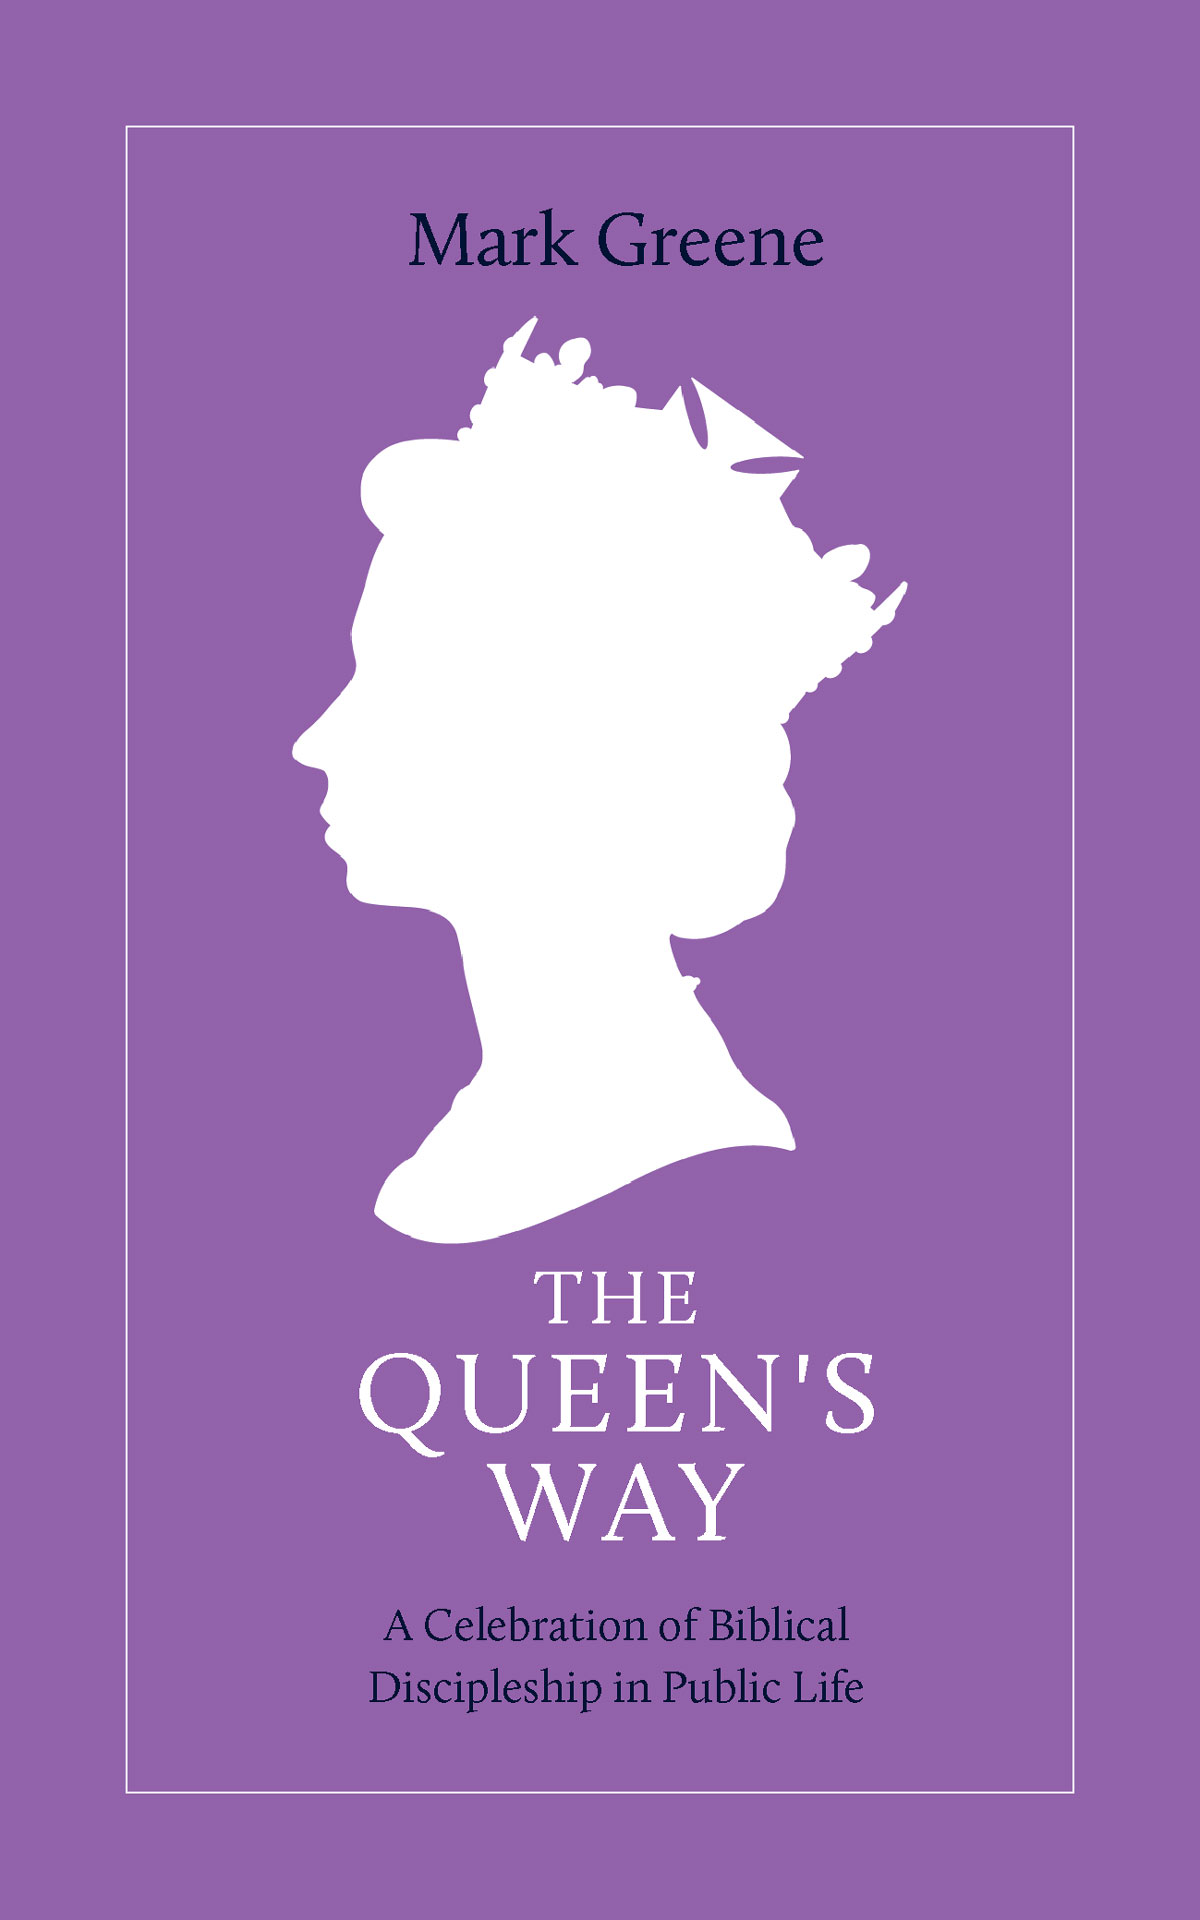 The Queen’s Way – A Celebration of Biblical Discipleship in Public Life